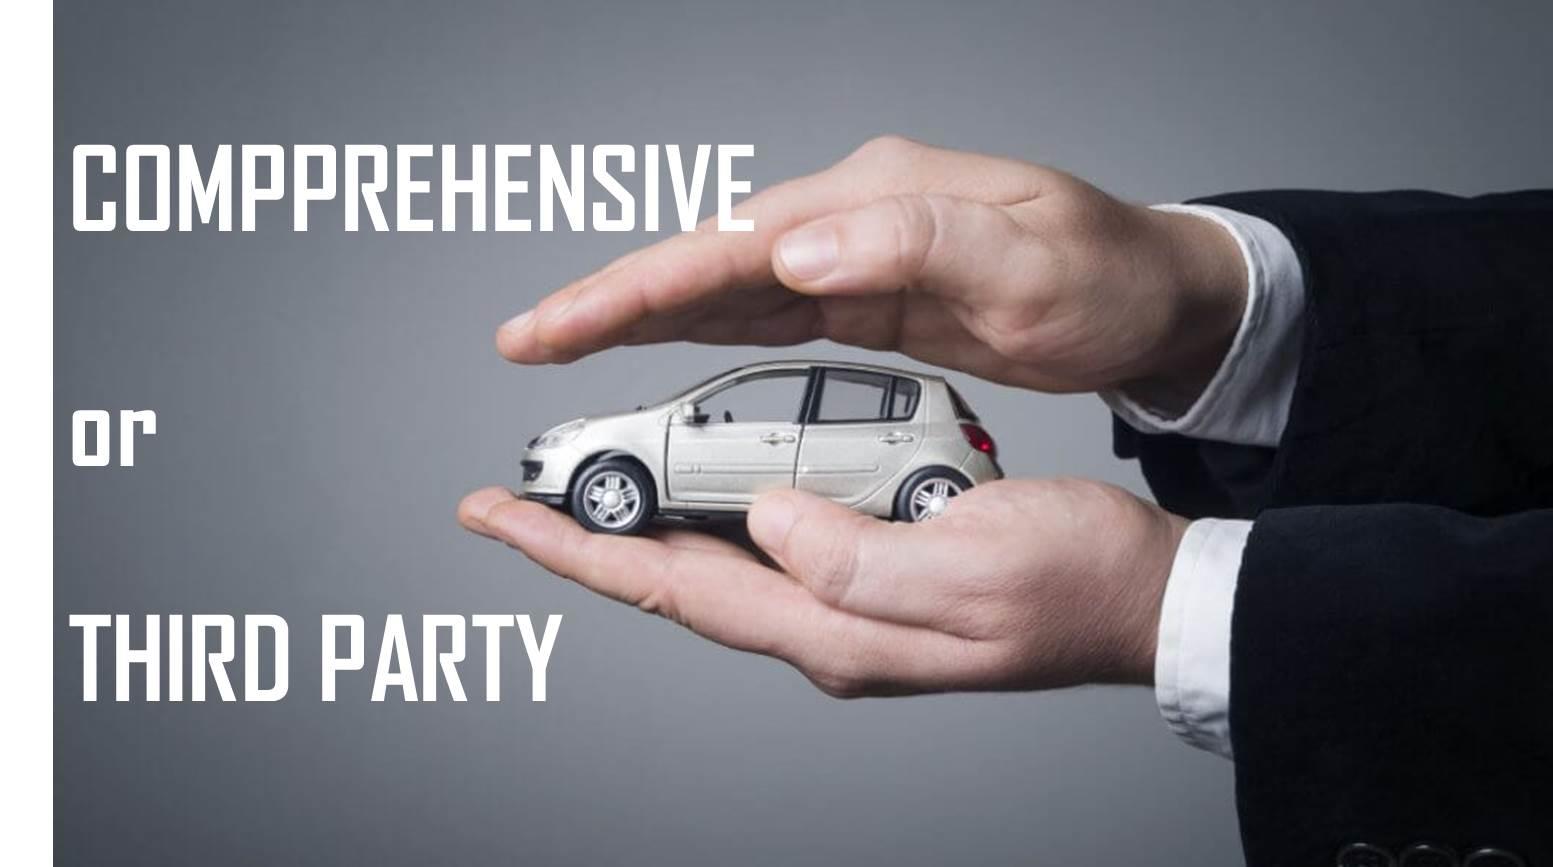 Why is Comprehensive Insurance more expensive than Third-Party Insurance & which is better?